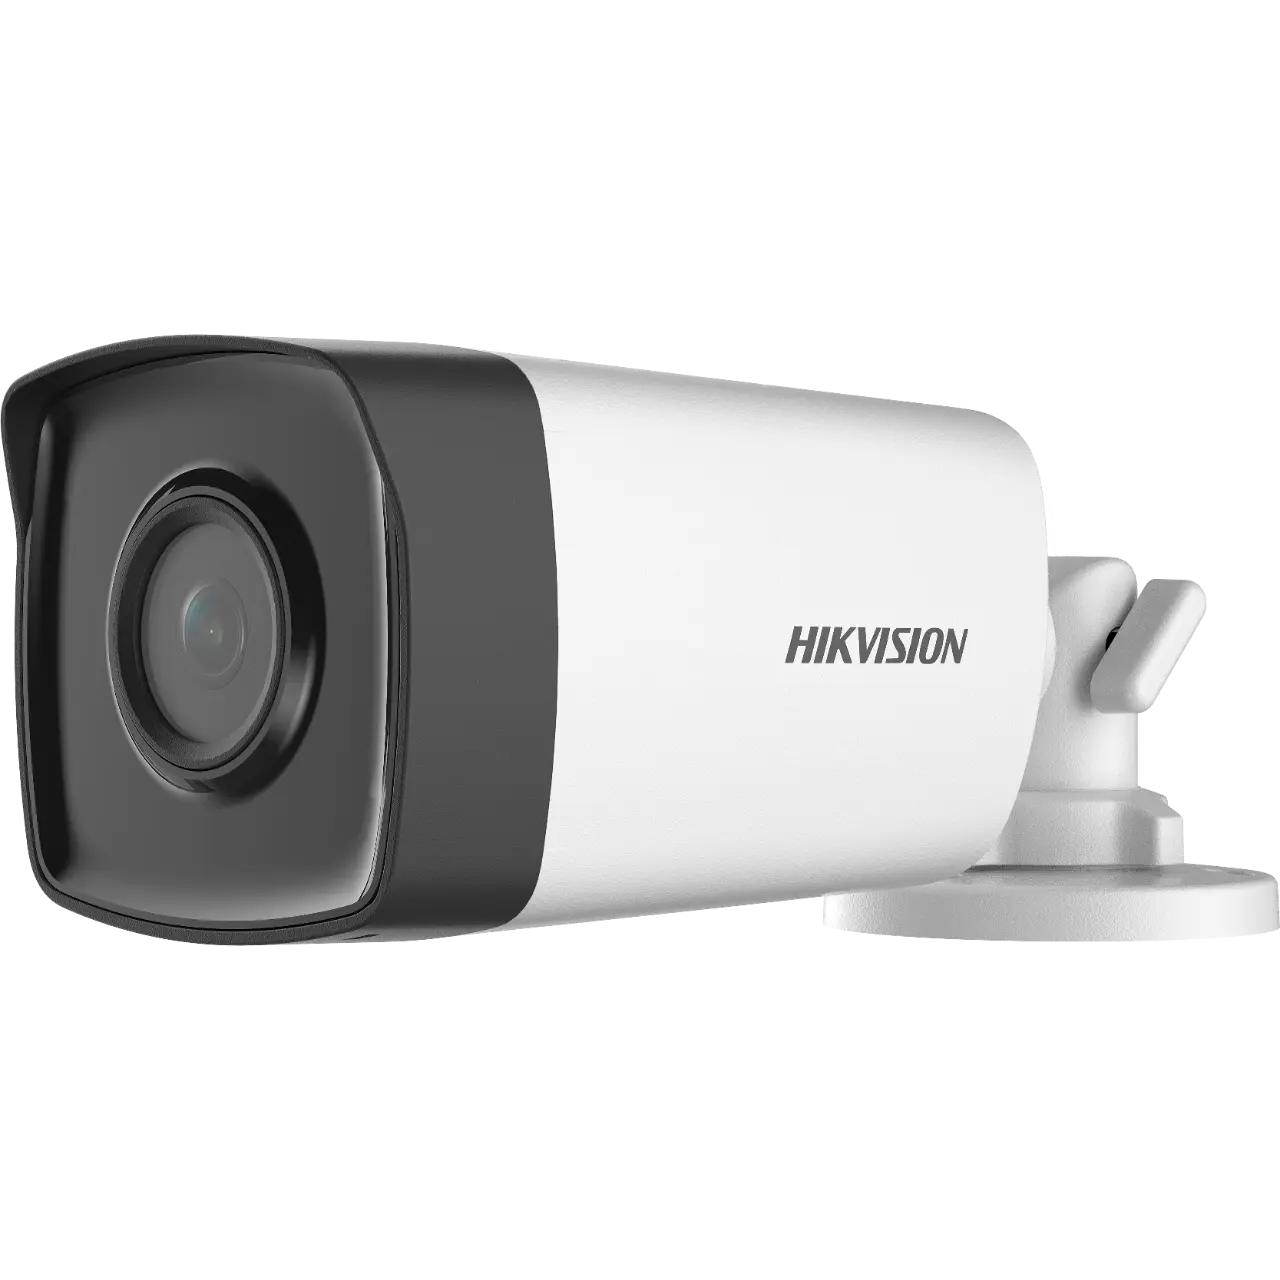 HIKVISION 2 MP FIXED BULLET CAMERA (DS-2CE17D0T-IT3 3.6MM C)